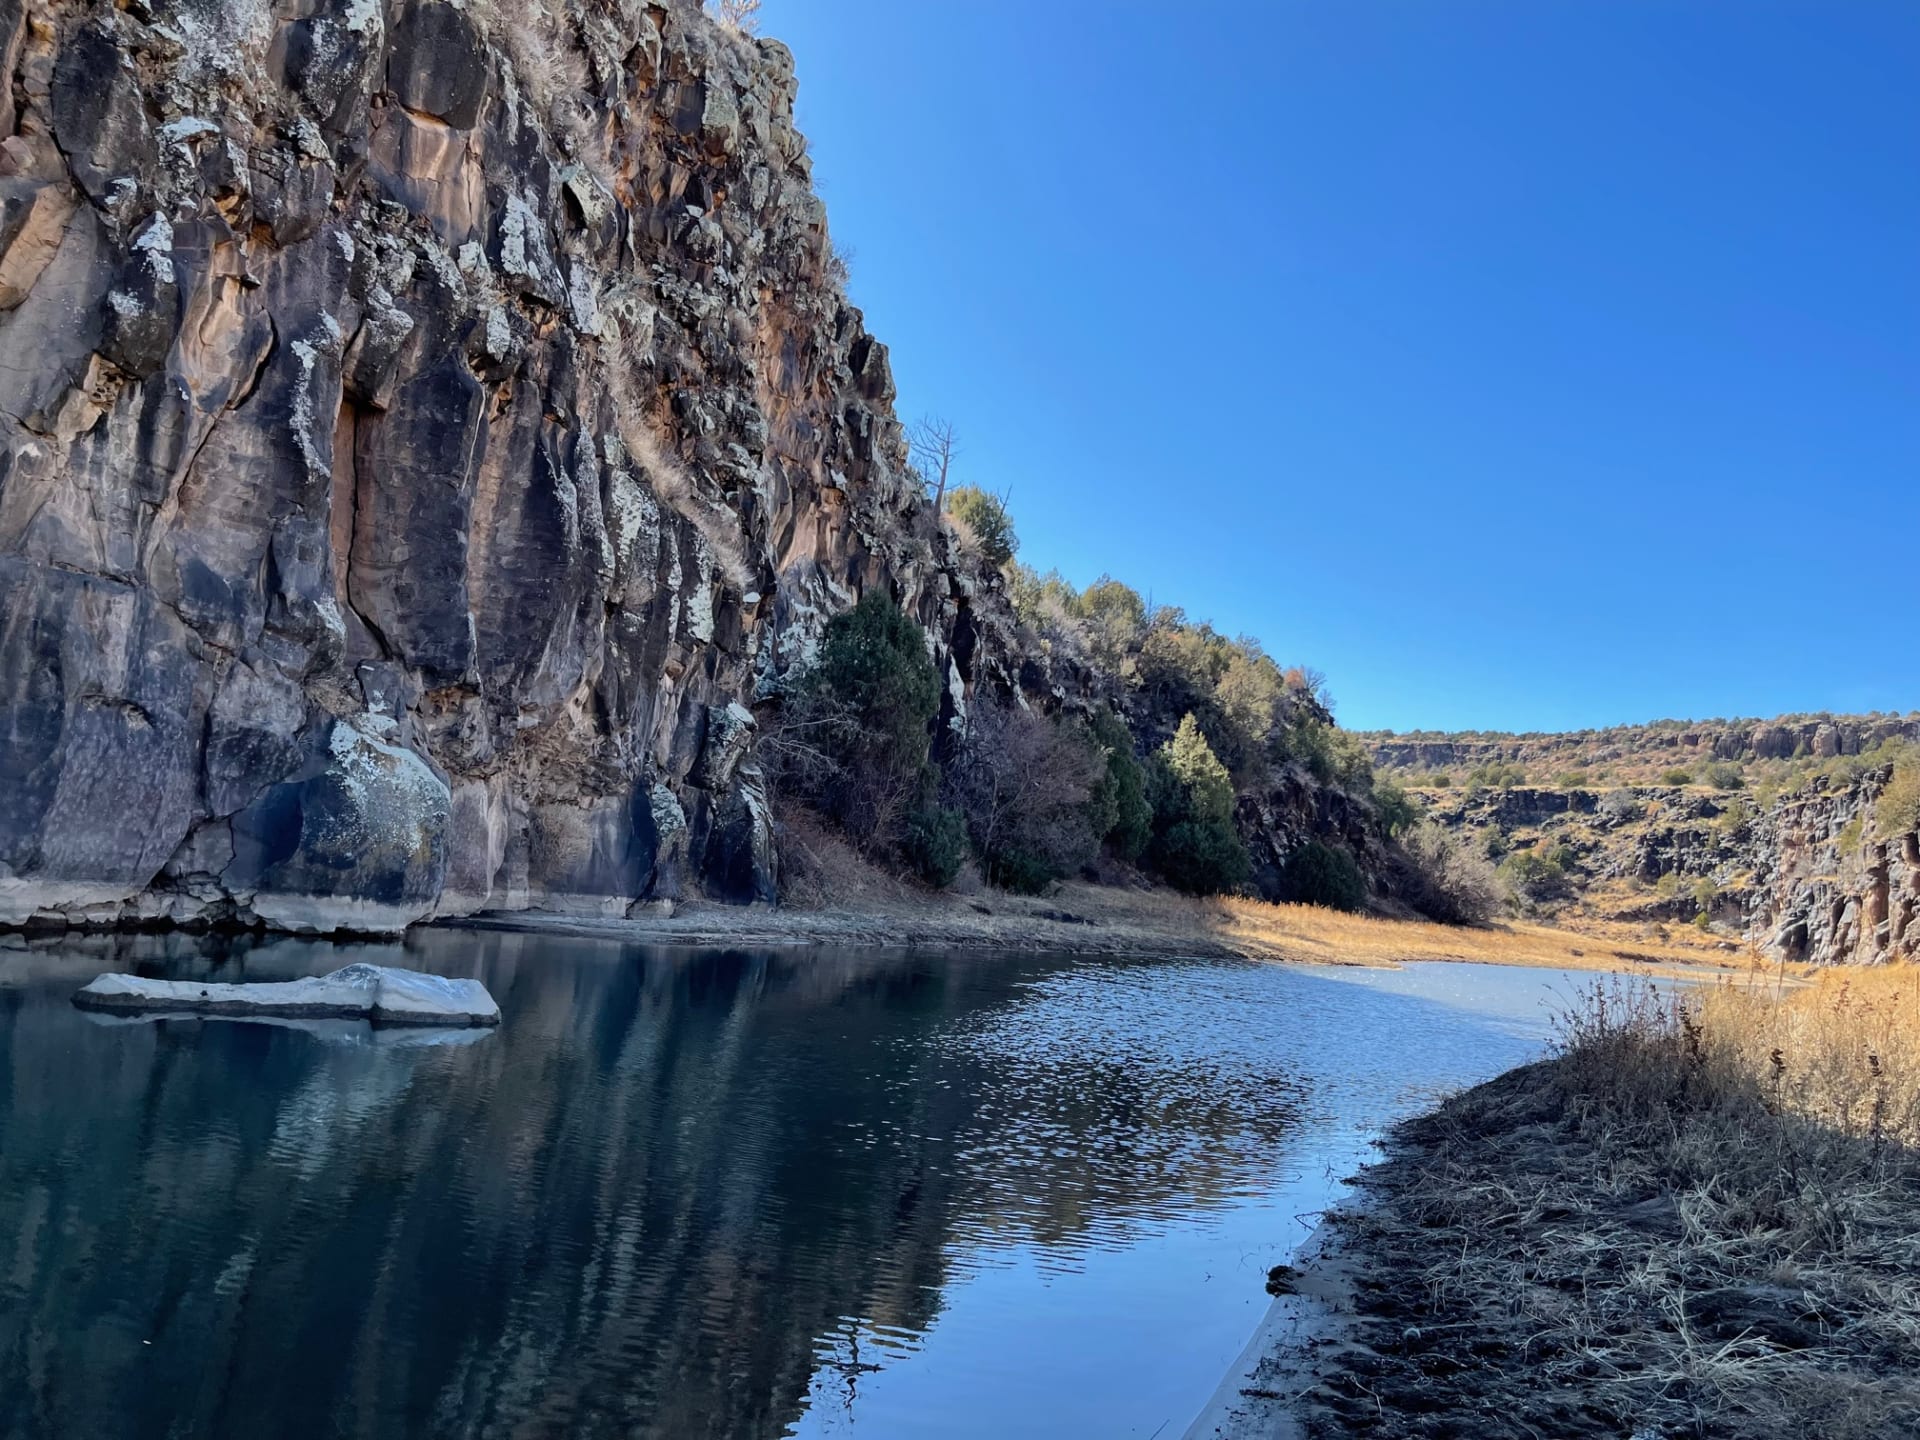 Hike down and  explore two miles of the Mora River!
